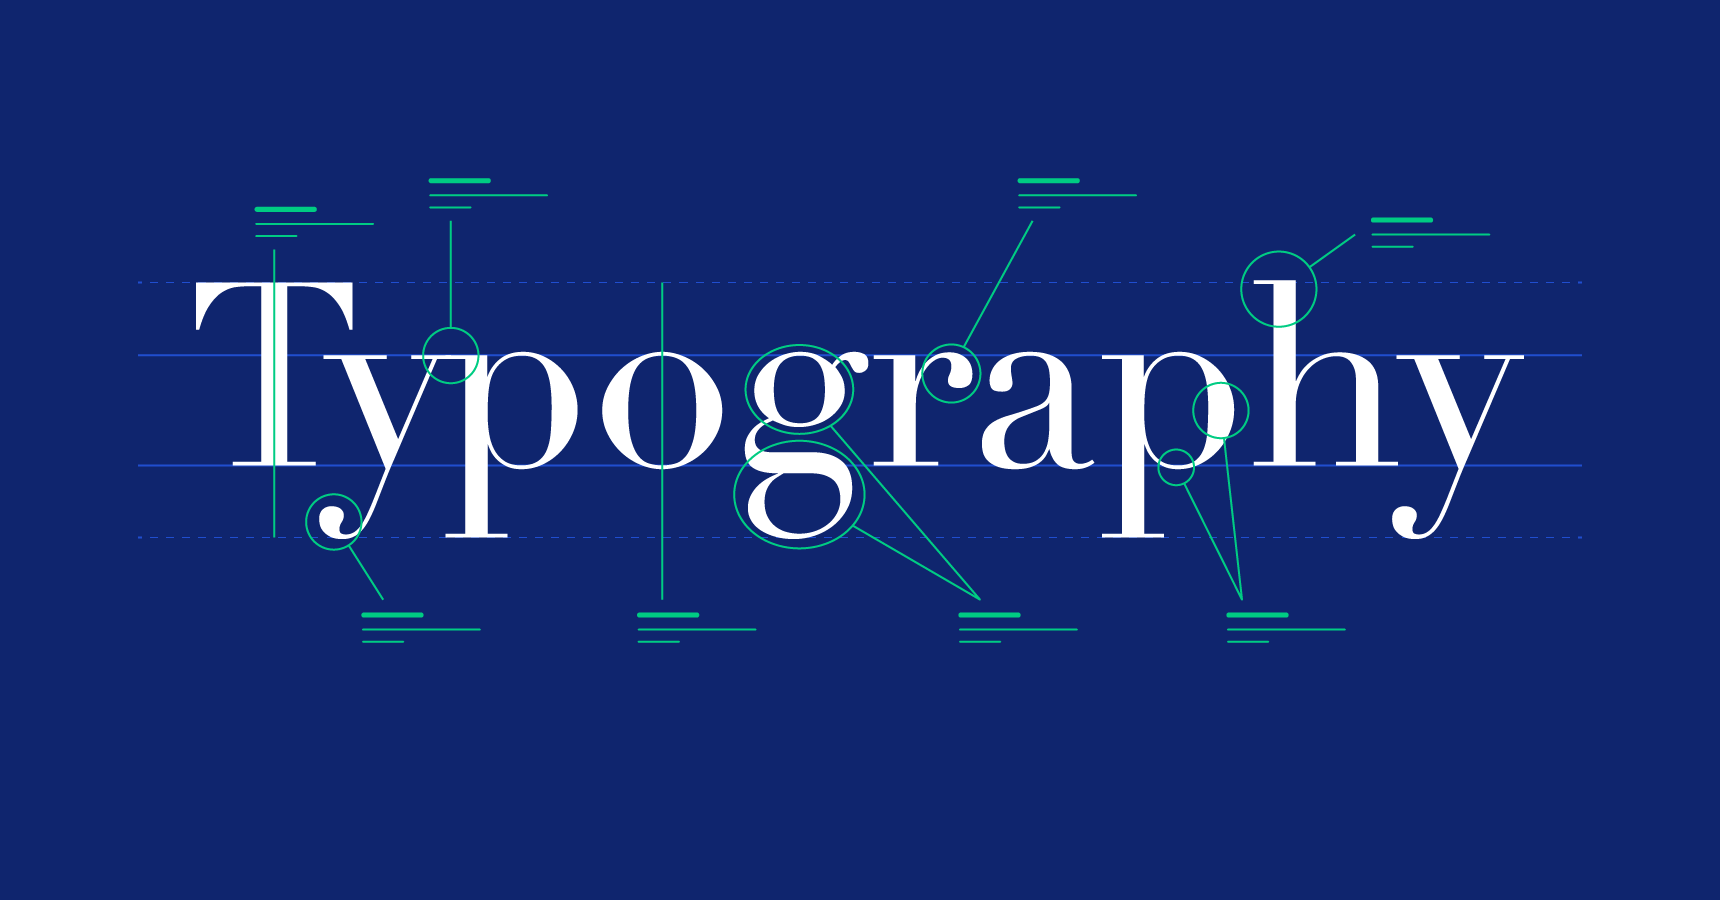 Designing with Text and Typography in Photography